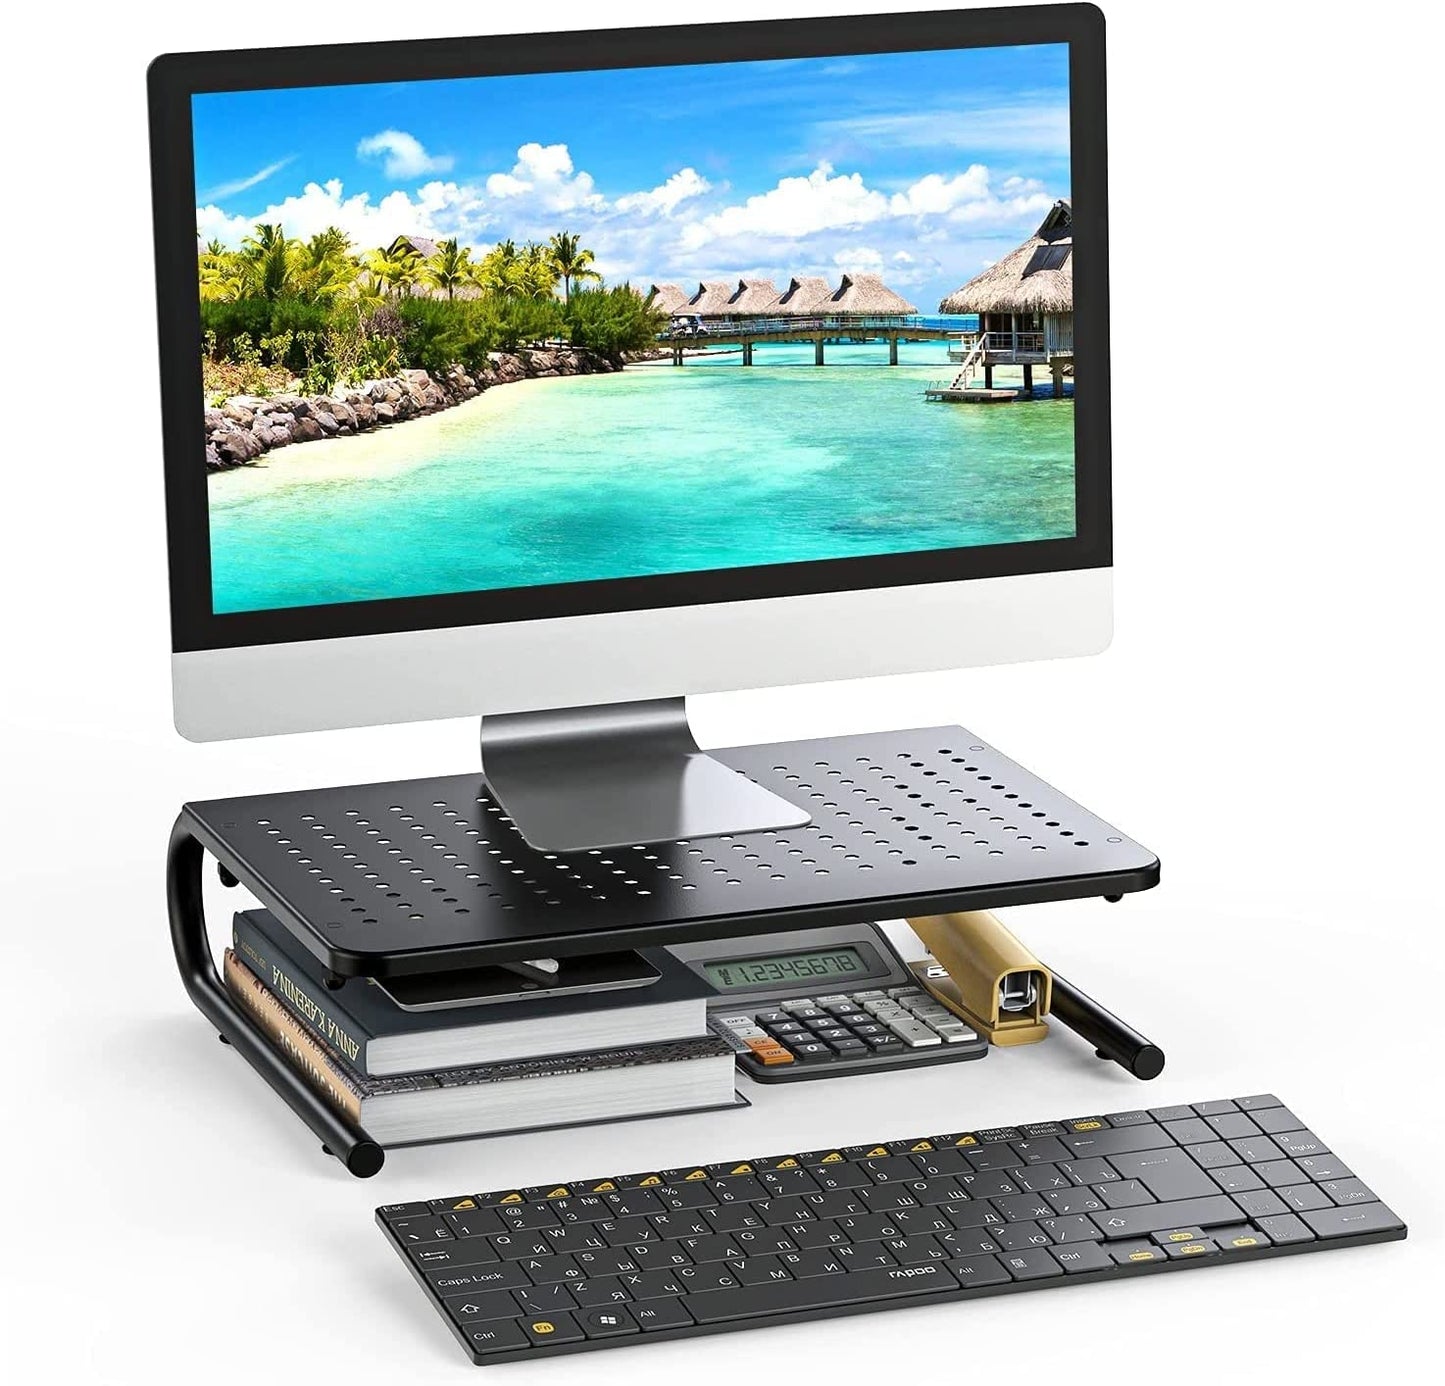 Elevated Monitor Stand with Ventilated Metal Construction for Computer, Laptop, Desk, Printer - 14.5" Platform, 4" Height